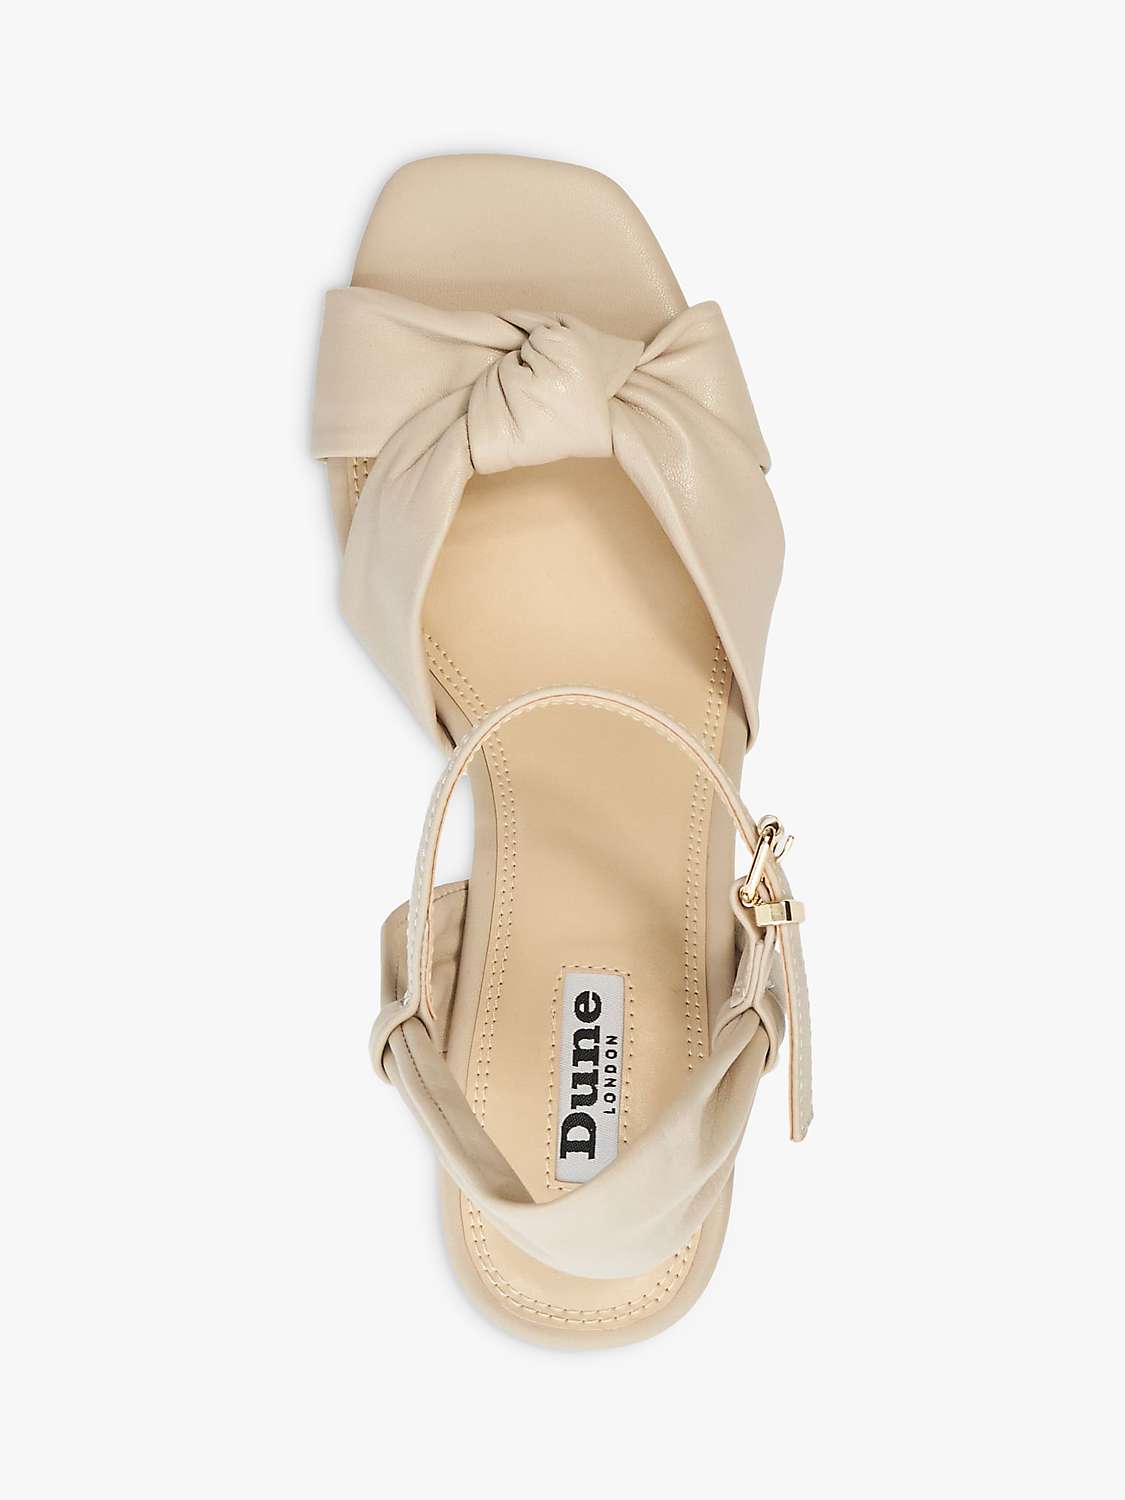 Buy Dune Kaino Leather Knotted Wedge Sandals, Ecru Online at johnlewis.com